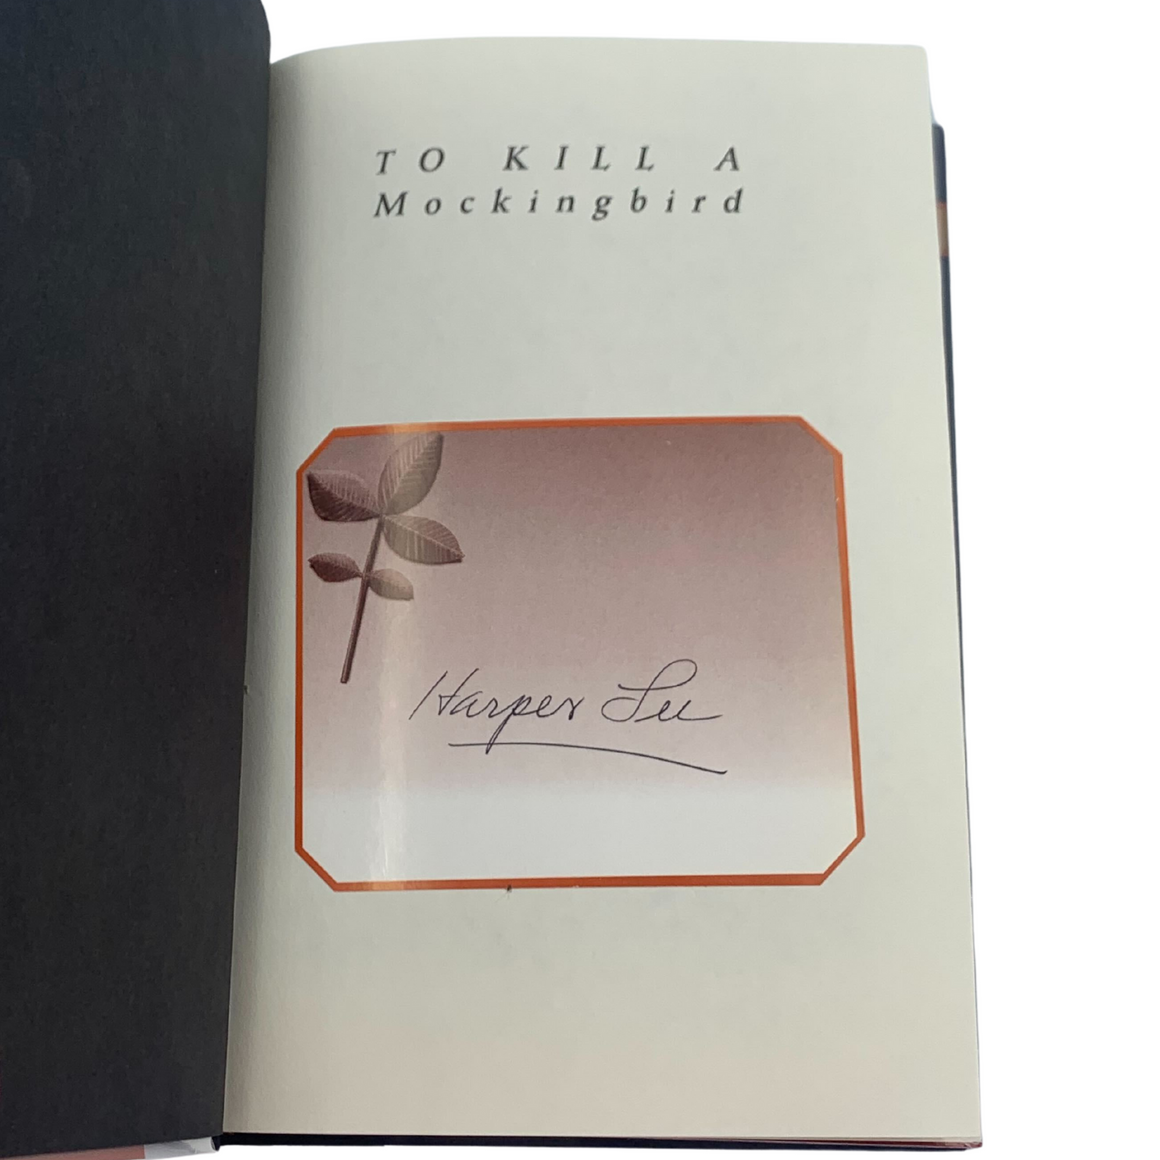 To Kill A Mockingbird, Signed by Harper Lee, Thirty-Fifth Anniversary Edition in Original Dust Jacket, 1995